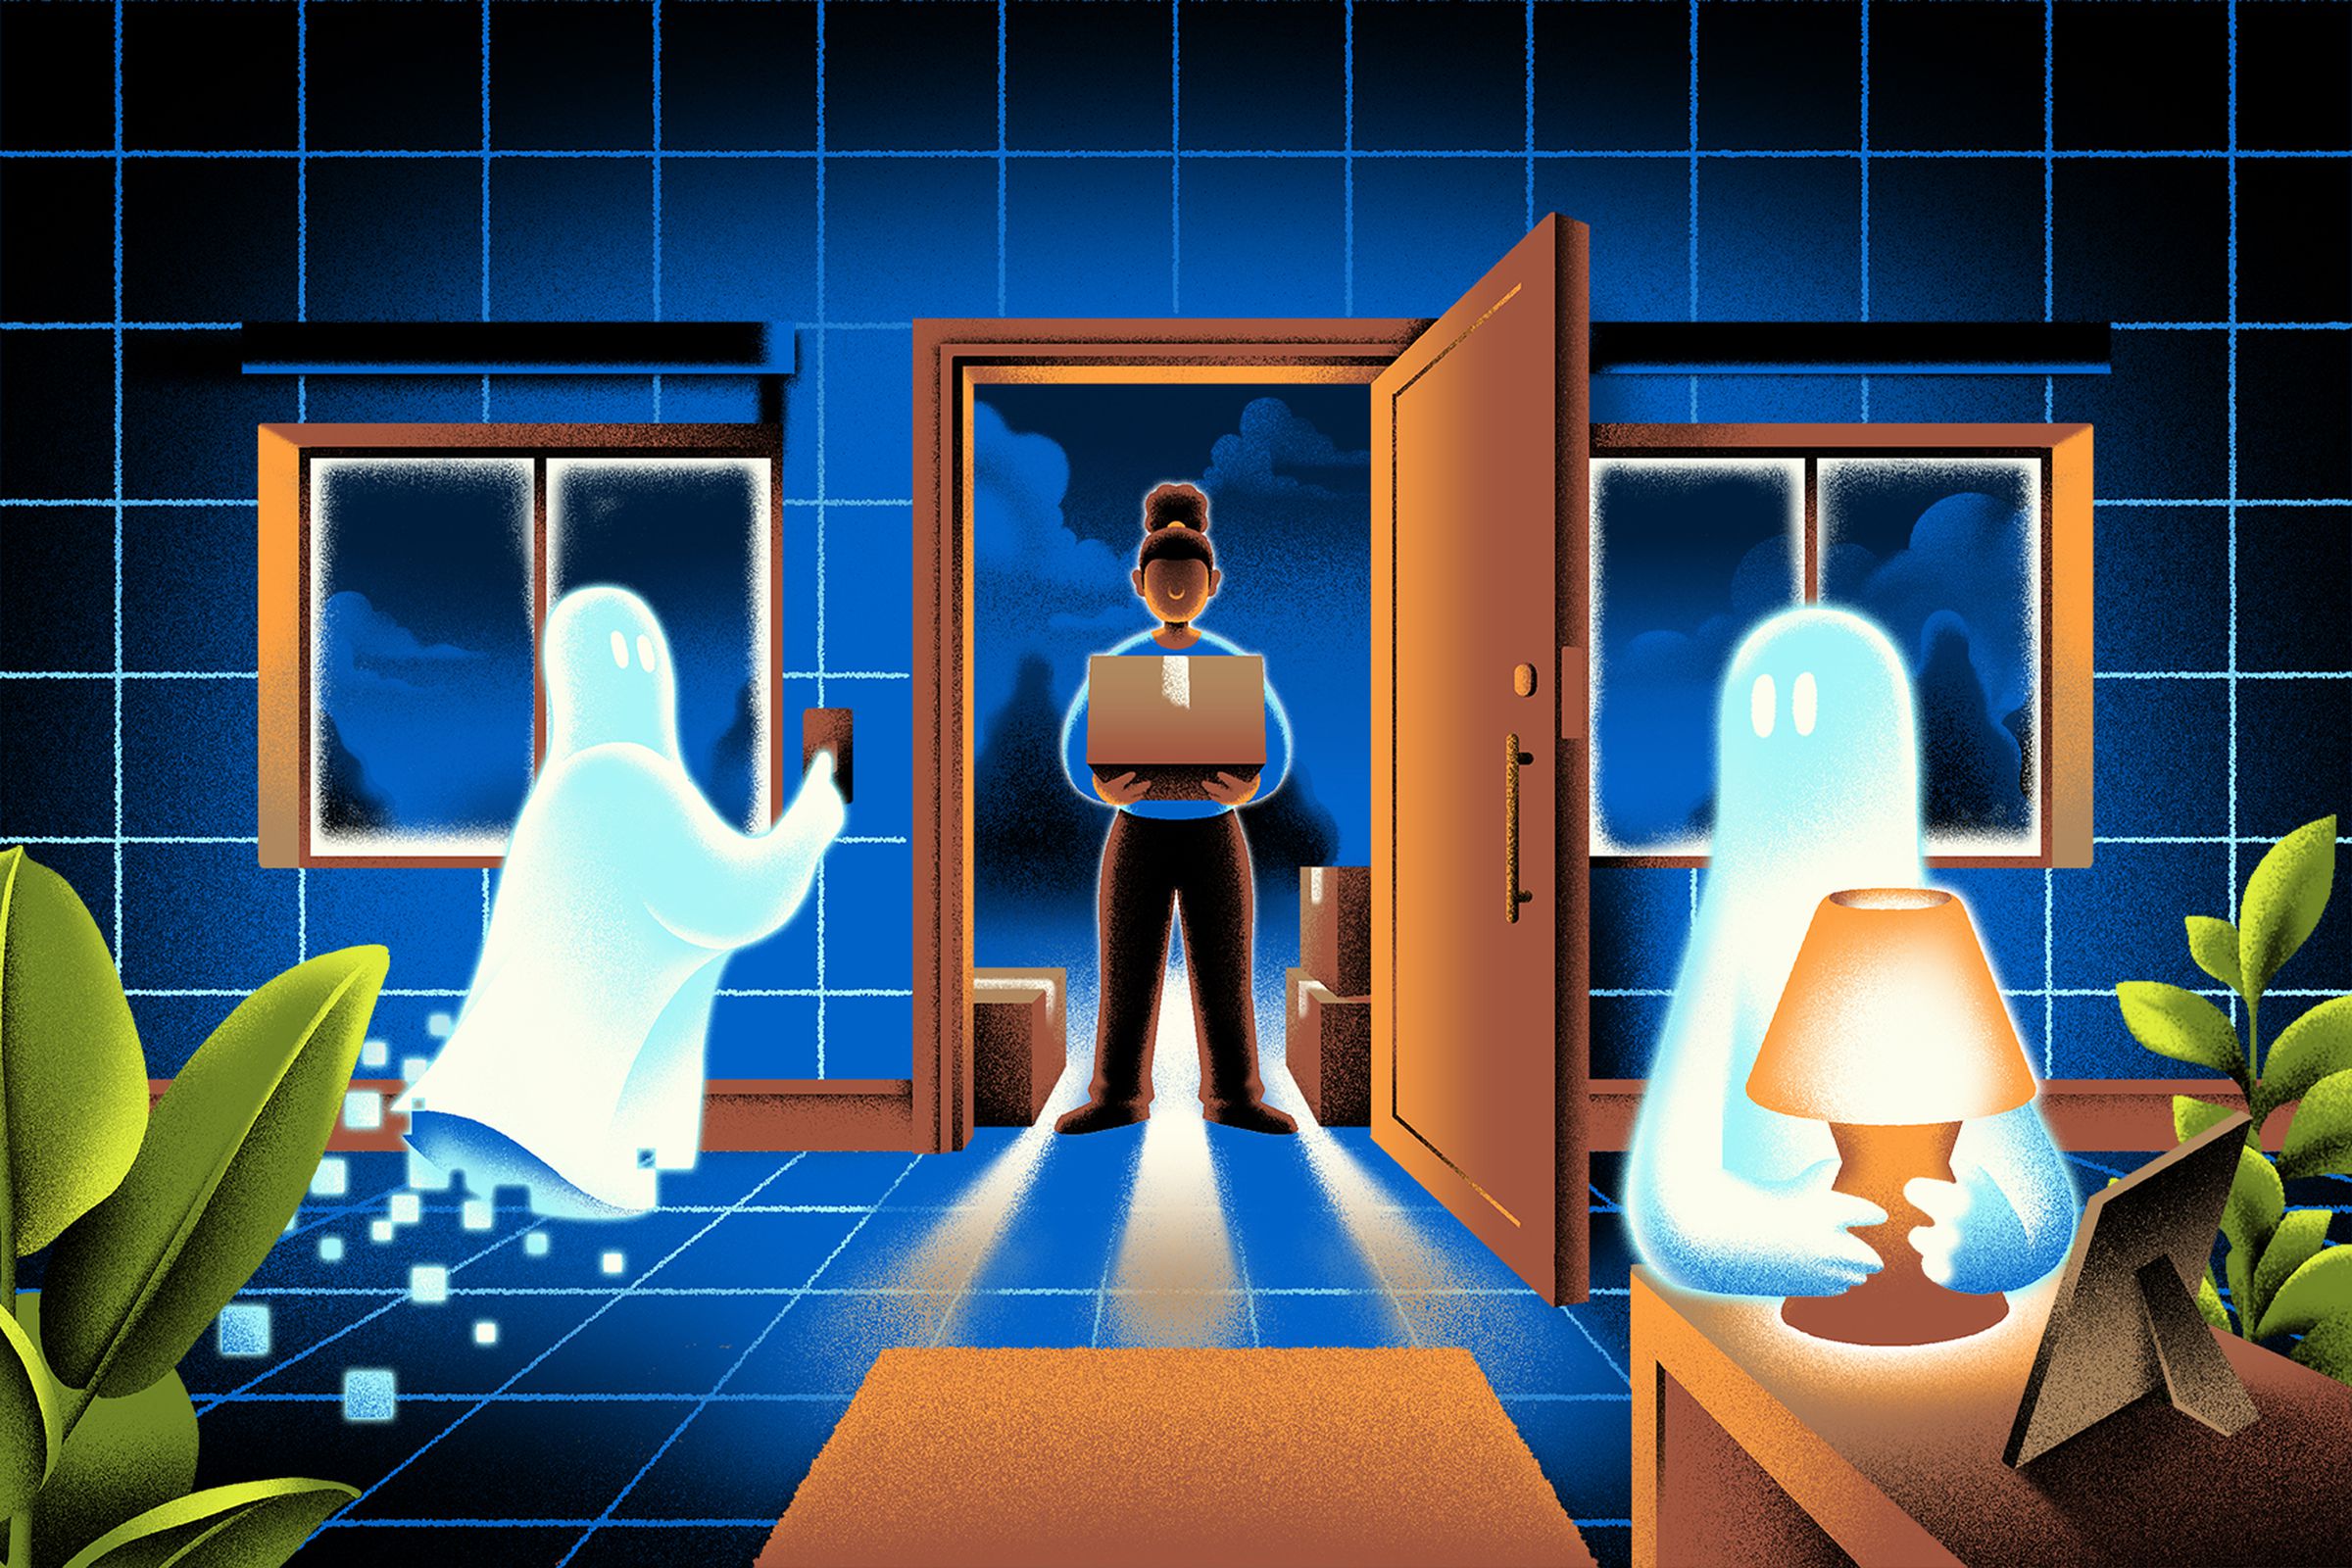 Illustration of a new homeowner haunted by two smart home ghosts who are messing with the blinds and lights.